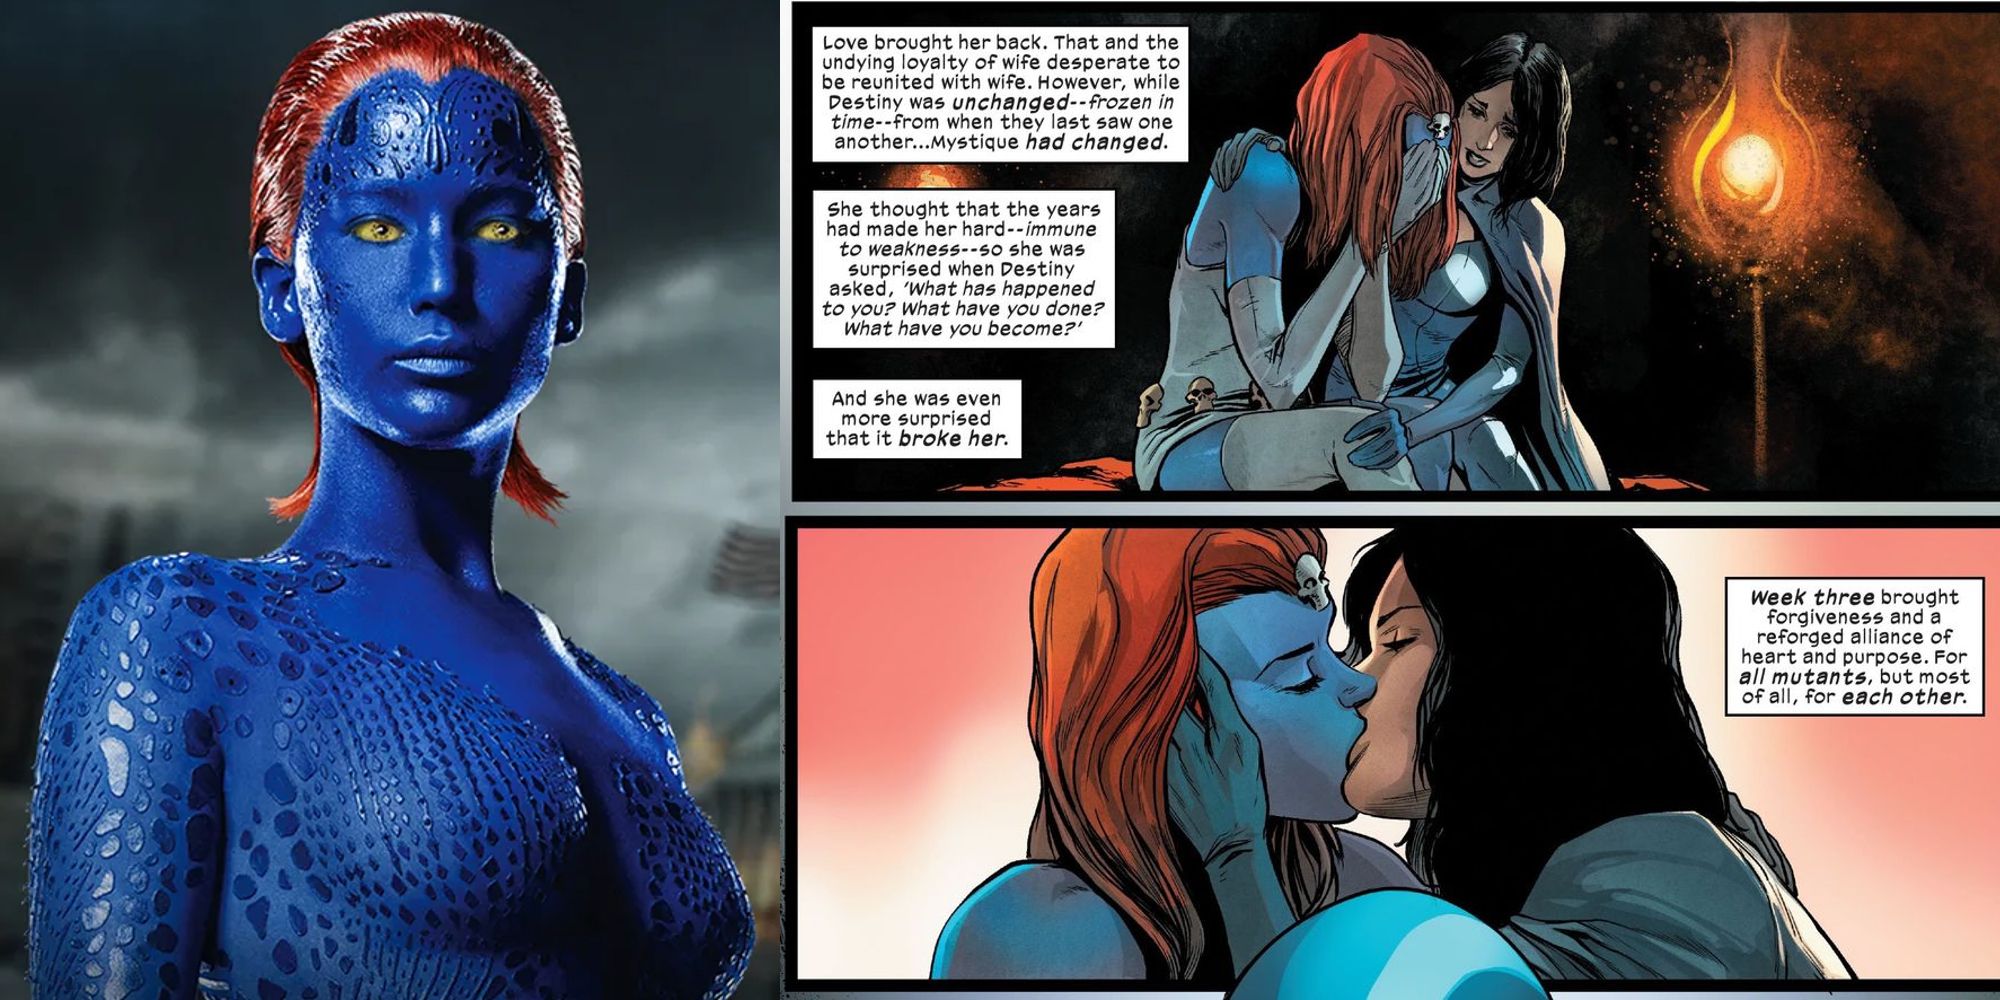 Jennifer Lawrence as Mystique in X-Men and reuniting with wife Irene Adler (Destiny) in comic